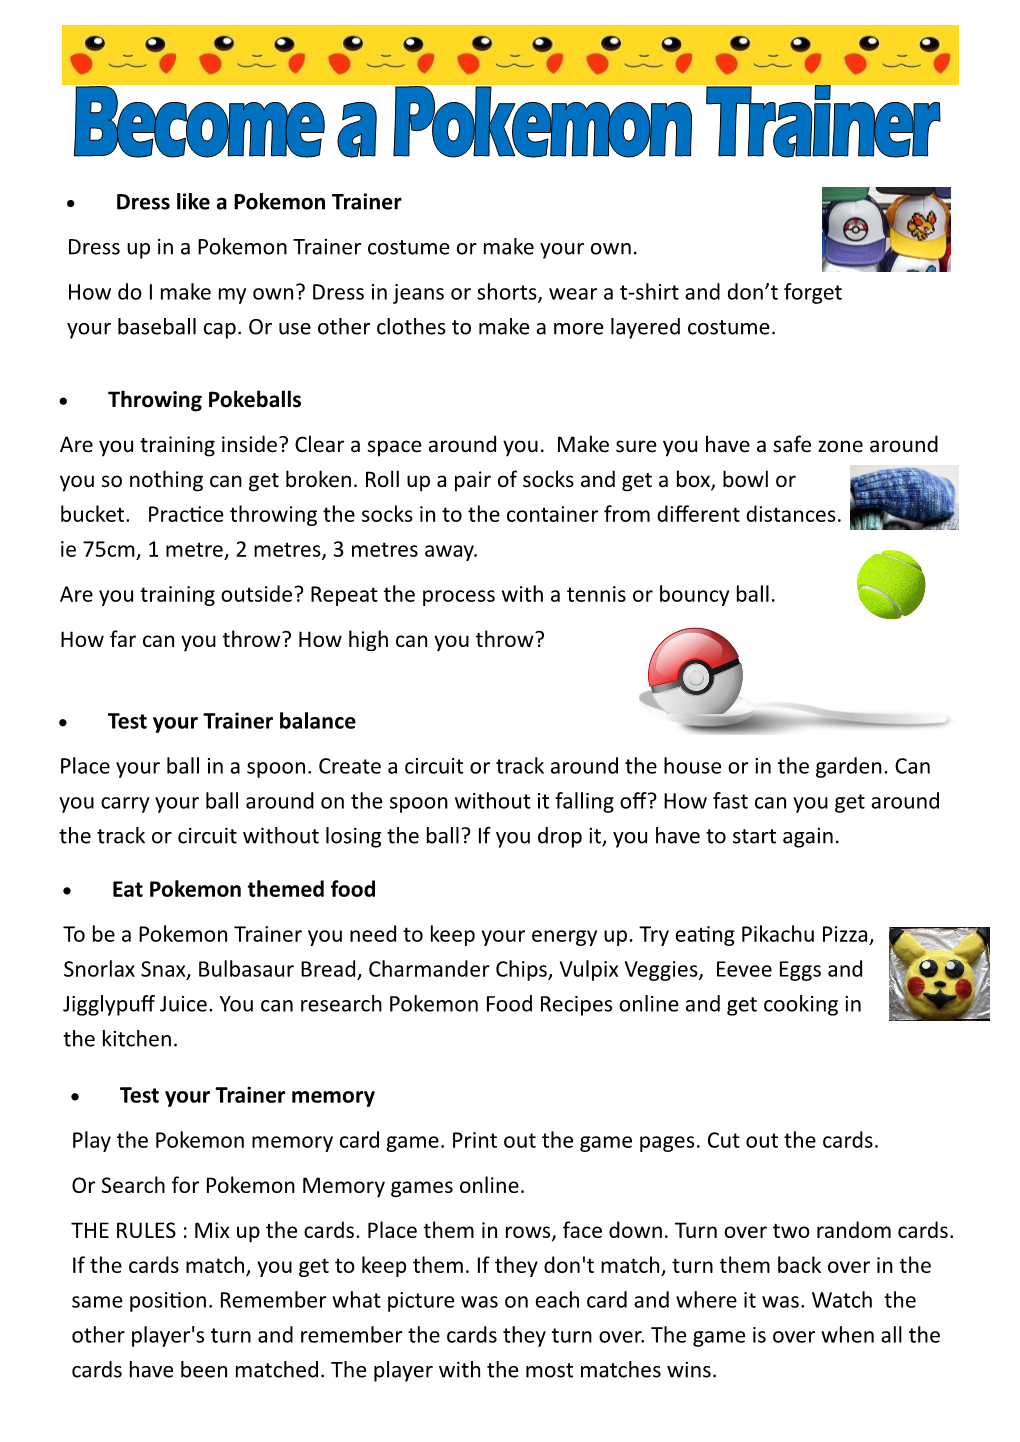 Dress Like a Pokemon Trainer Dress up in a Pokemon Trainer Costume Or Make Your Own